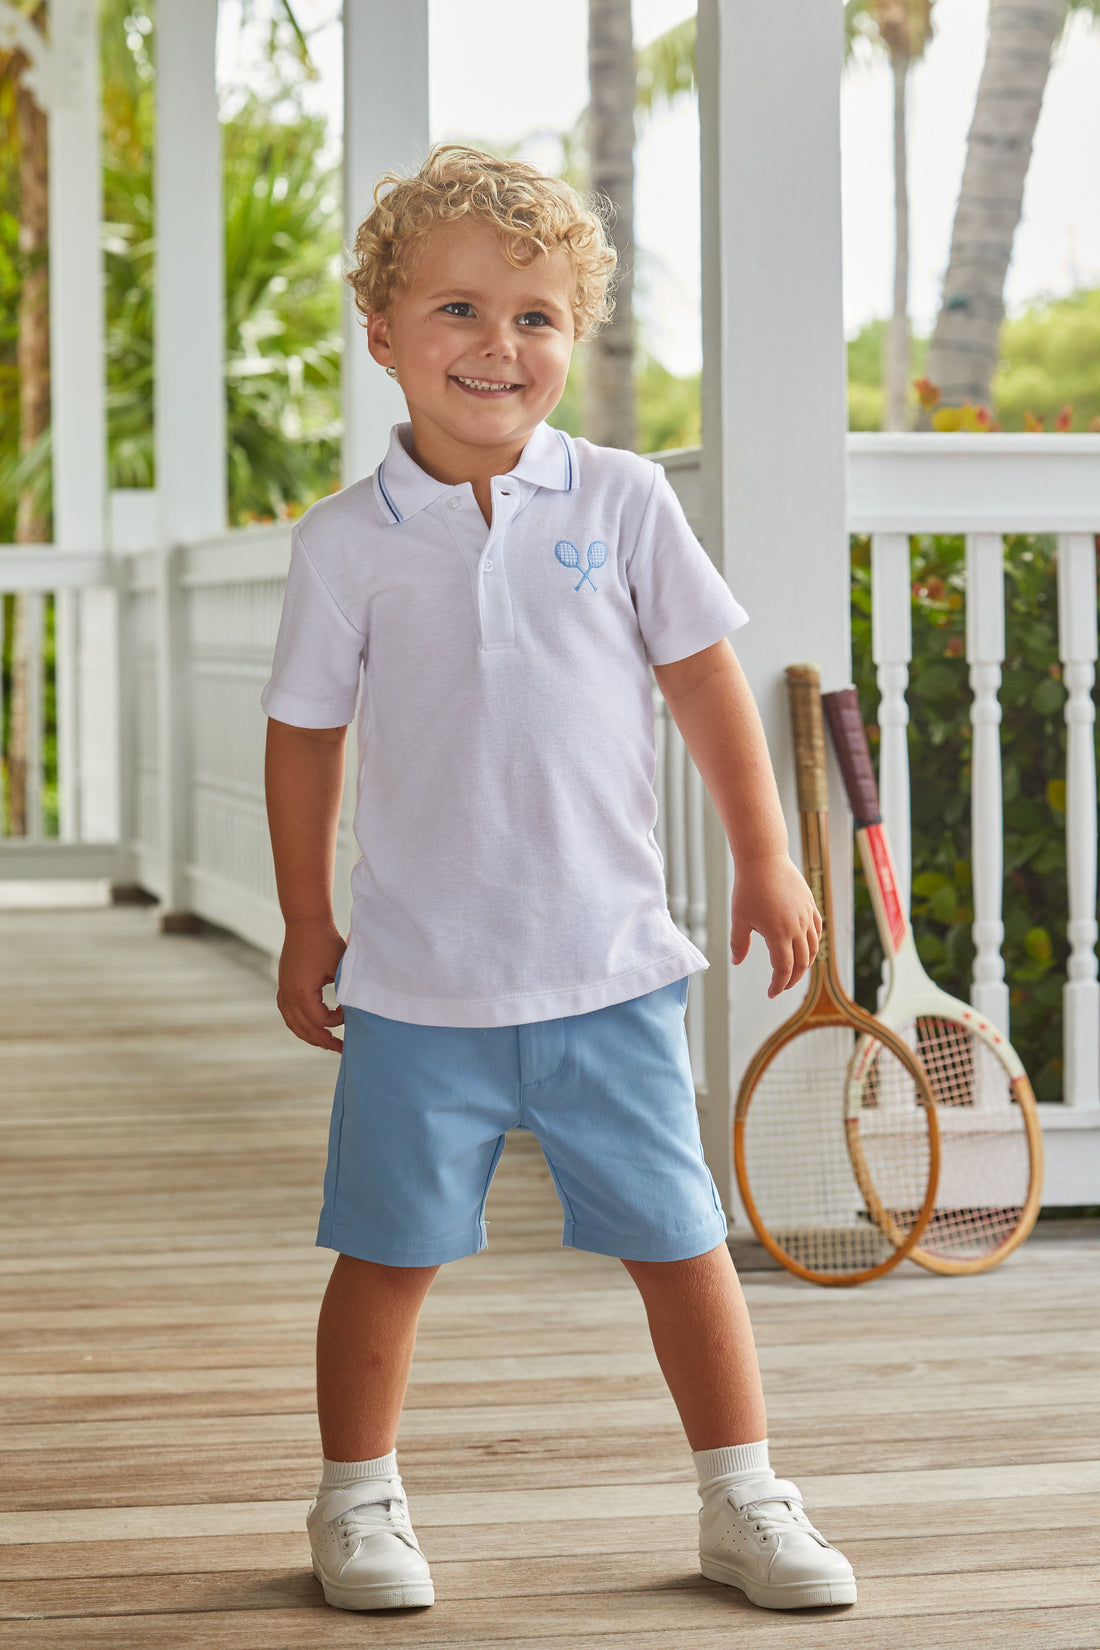 Little English classic boys clothing, white short sleeve polo with tipping at the collar and crossed tennis racket embroidery